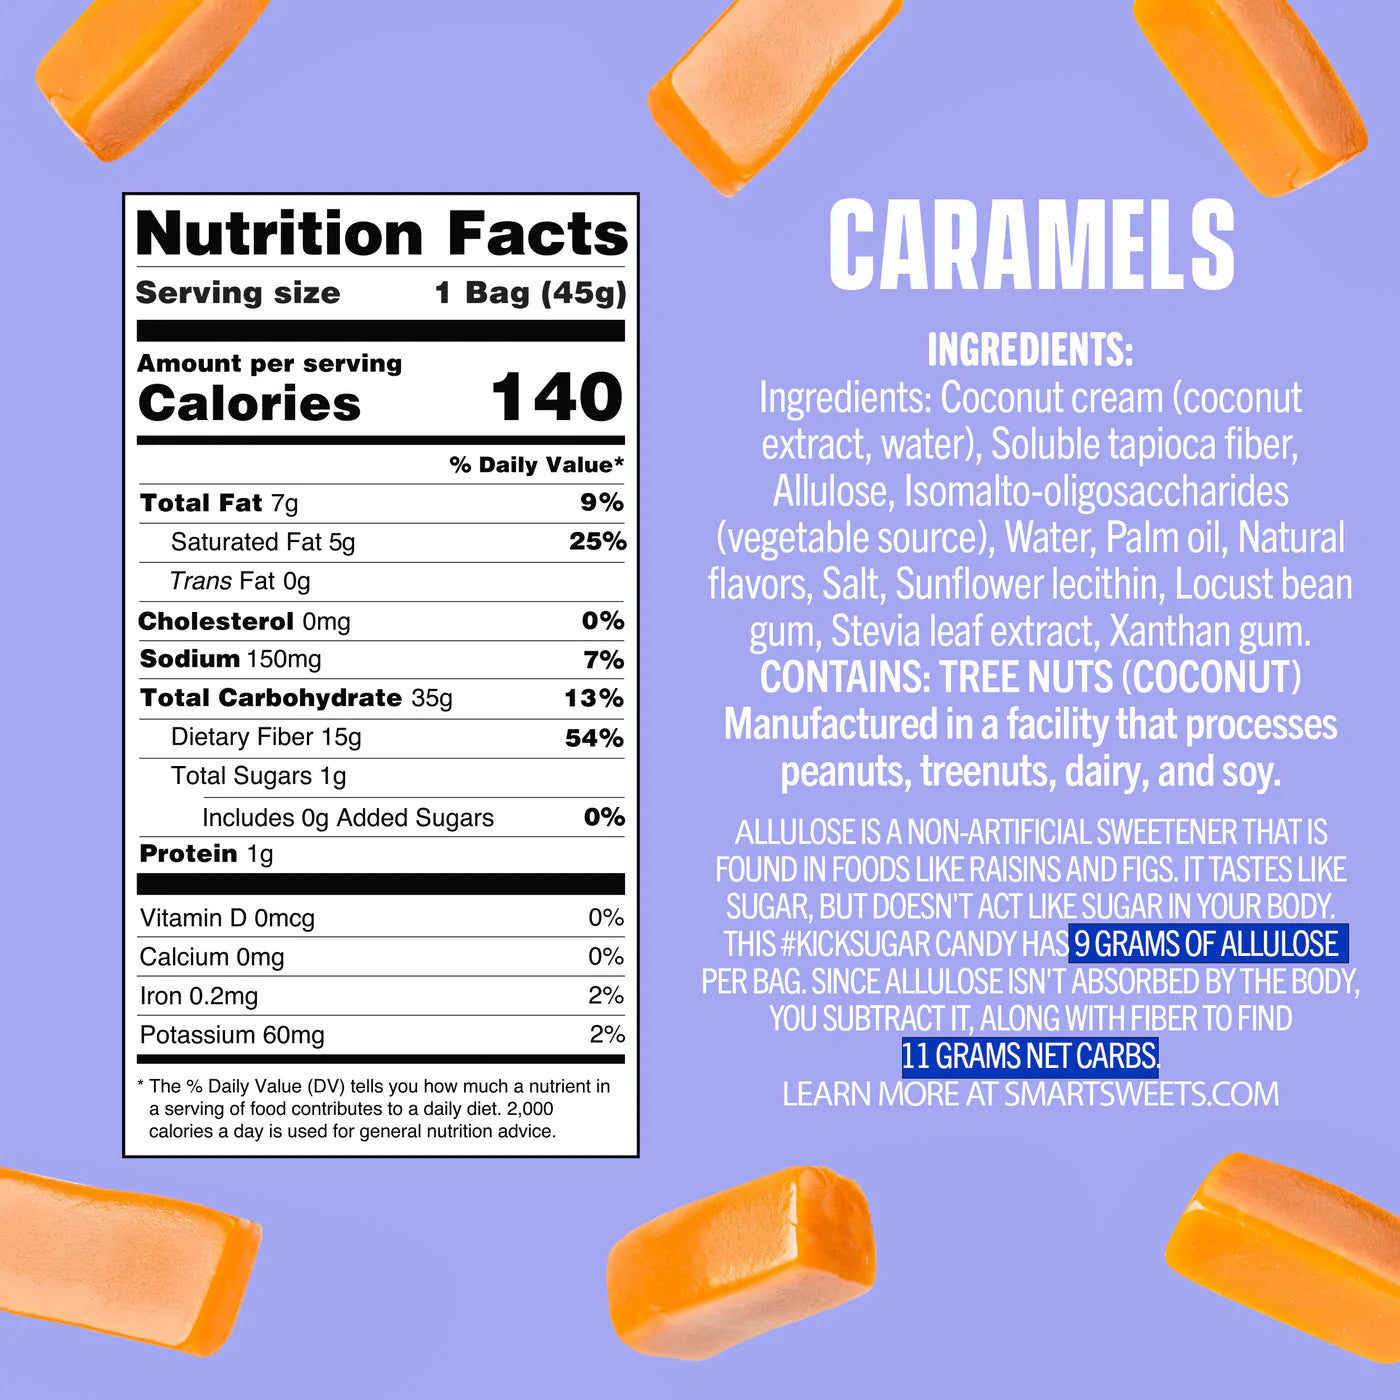 Smart Sweets Caramels 45g (1.6 oz) - High-quality Fiber by Smart Sweets at 